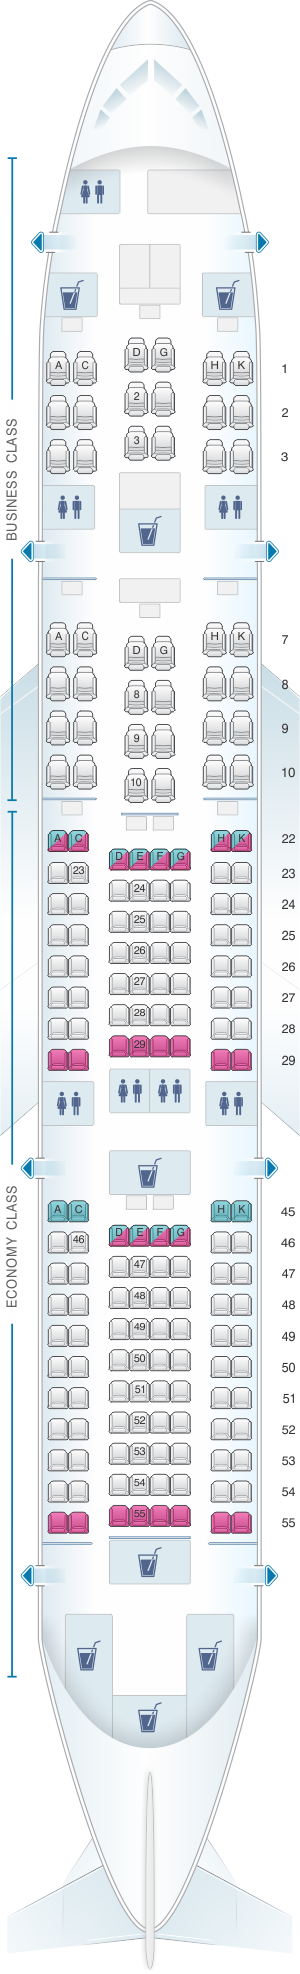 Seat map for Japan Airlines (JAL) Boeing B787-8 E01